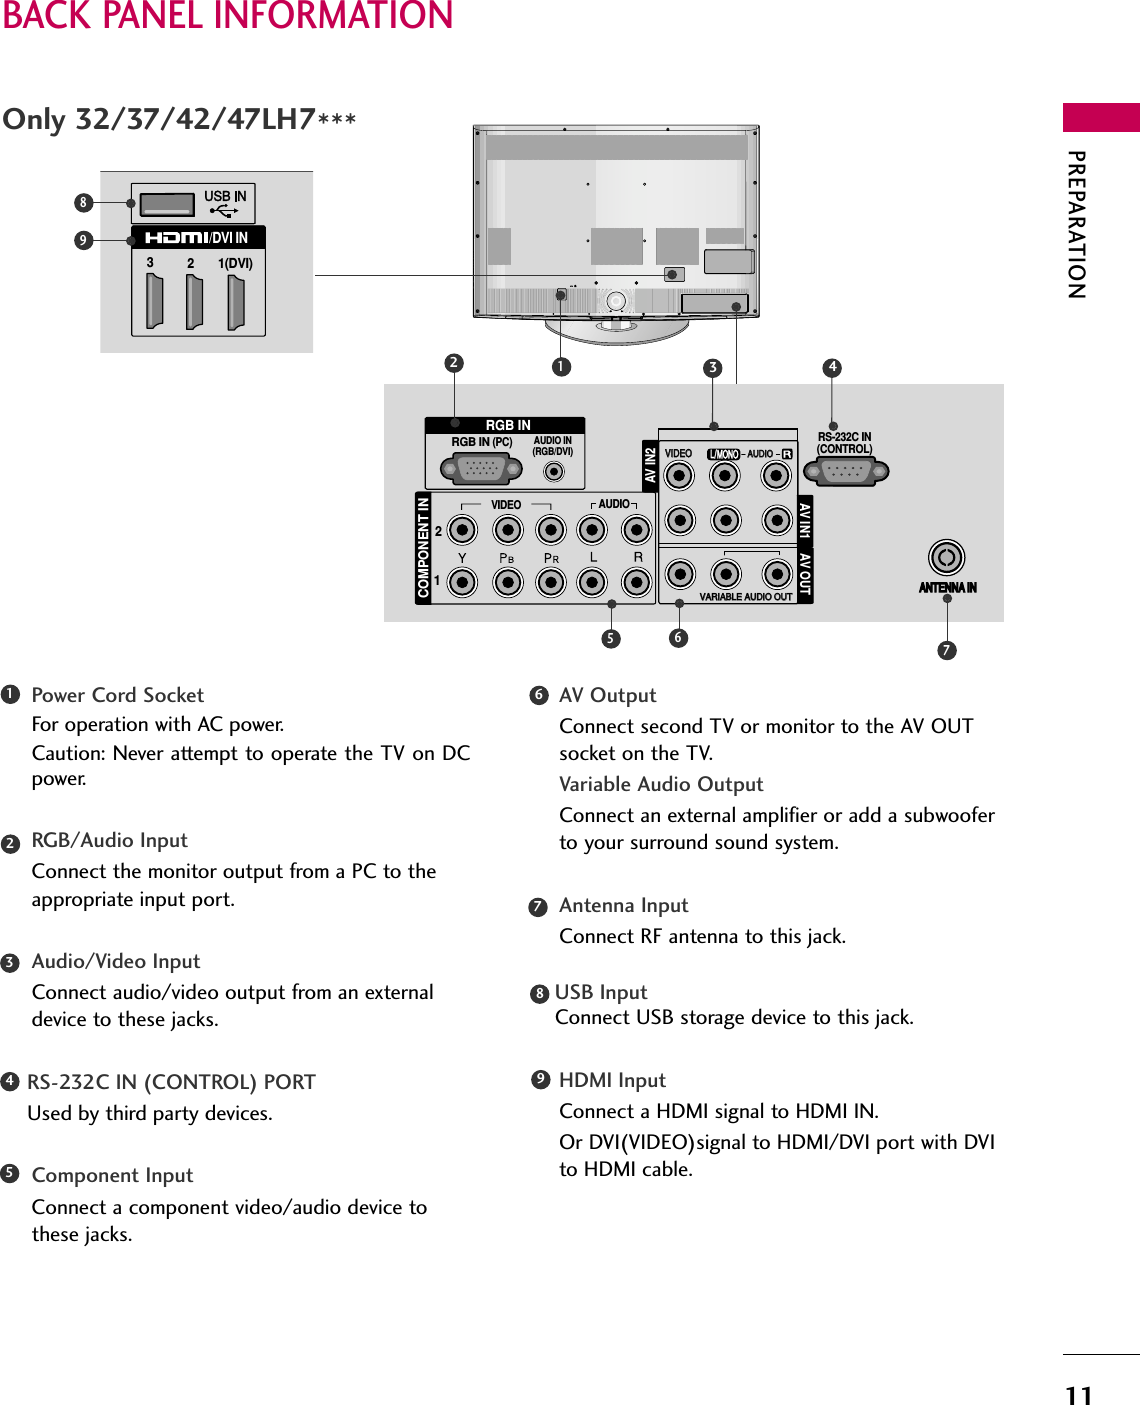 PREPARATION11BACK PANEL INFORMATION12AUDIO IN(RGB/DVI)RGB IN (PC)RGB INCOMPONENT INAUDIOVIDEOL/L/MONORAUDIOAUDIOVIDEOVIDEOVARIABLE AUDIO OUTVARIABLE AUDIO OUTAV IN1 AV OUTAV IN2ANTENNA INRS-232C IN(CONTROL)2571Only 32/37/42/47LH7***Power Cord SocketFor operation with AC power. Caution: Never attempt to operate the TV on DCpower.RGB/Audio InputConnect the monitor output from a PC to theappropriate input port.Audio/Video InputConnect audio/video output from an externaldevice to these jacks.RS-232C IN (CONTROL) PORTUsed by third party devices.Component InputConnect a component video/audio device tothese jacks.AV OutputConnect second TV or monitor to the AV OUTsocket on the TV.Variable Audio OutputConnect an external amplifier or add a subwooferto your surround sound system.Antenna InputConnect RF antenna to this jack.USB InputConnect USB storage device to this jack.HDMI InputConnect a HDMI signal to HDMI IN.Or DVI(VIDEO)signal to HDMI/DVI port with DVIto HDMI cable.12346784361(DVI)2/DVI IN38959